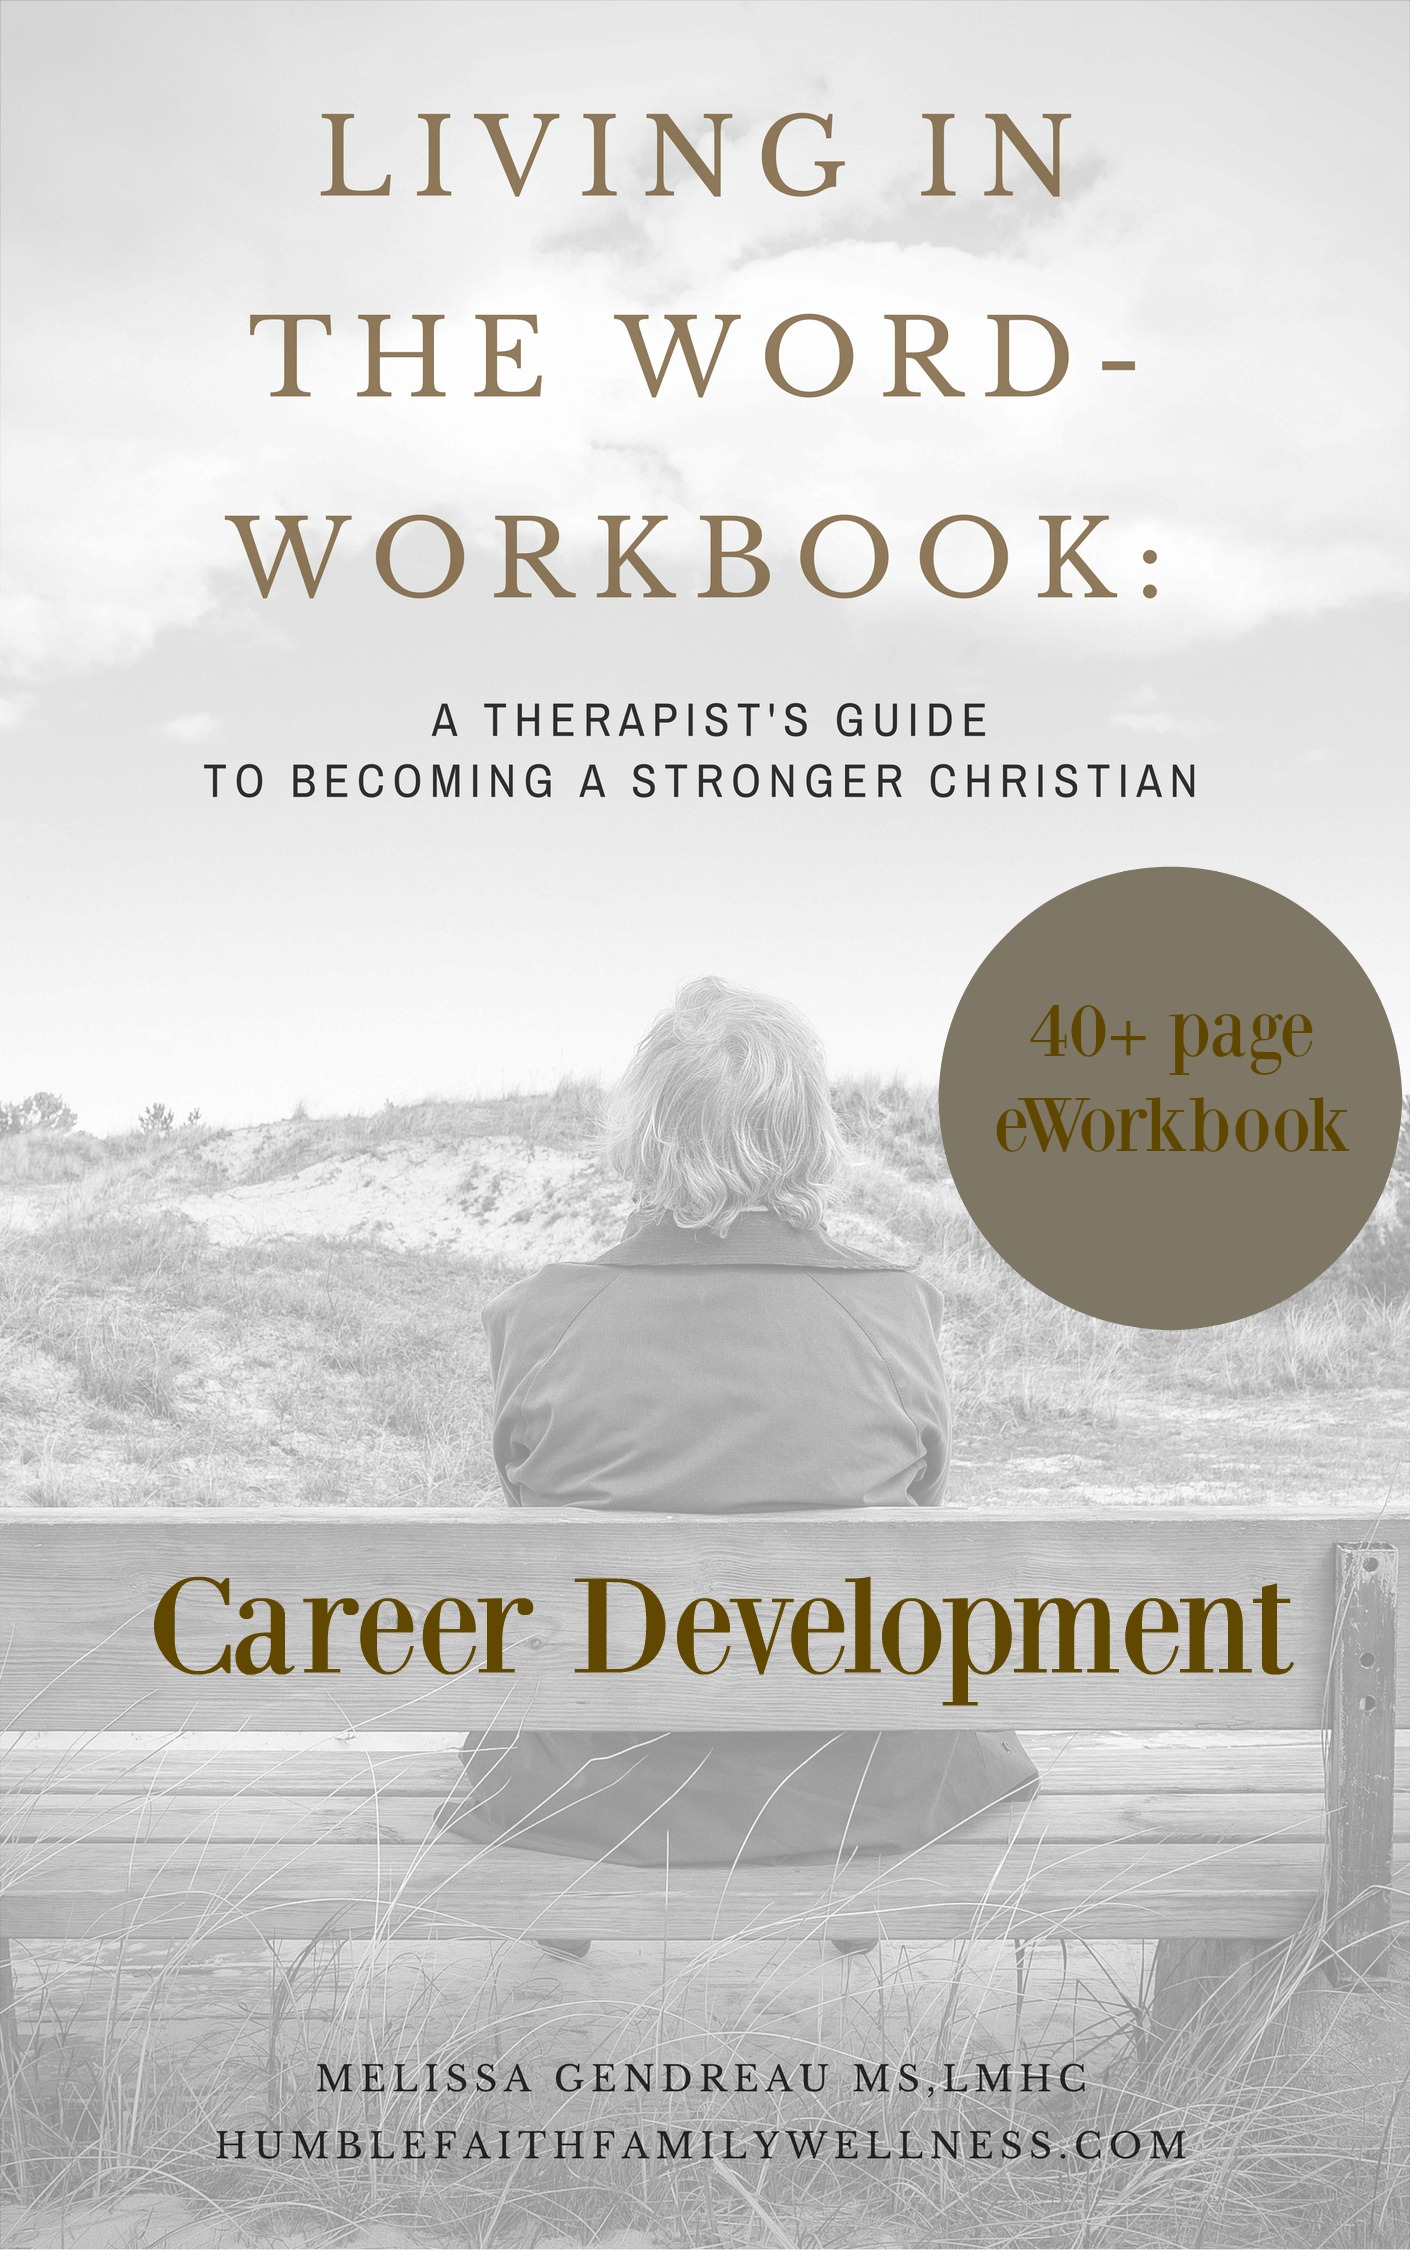 The Living in the Word eWorkbook: Career Development section is more than just focusing on a job. It addresses ways to acknowledge your talents and gifts that God gave you. As well as walk you through your motivation and drive, interaction with other, and increasing your leadership skills. Start the journey for $2.50. 